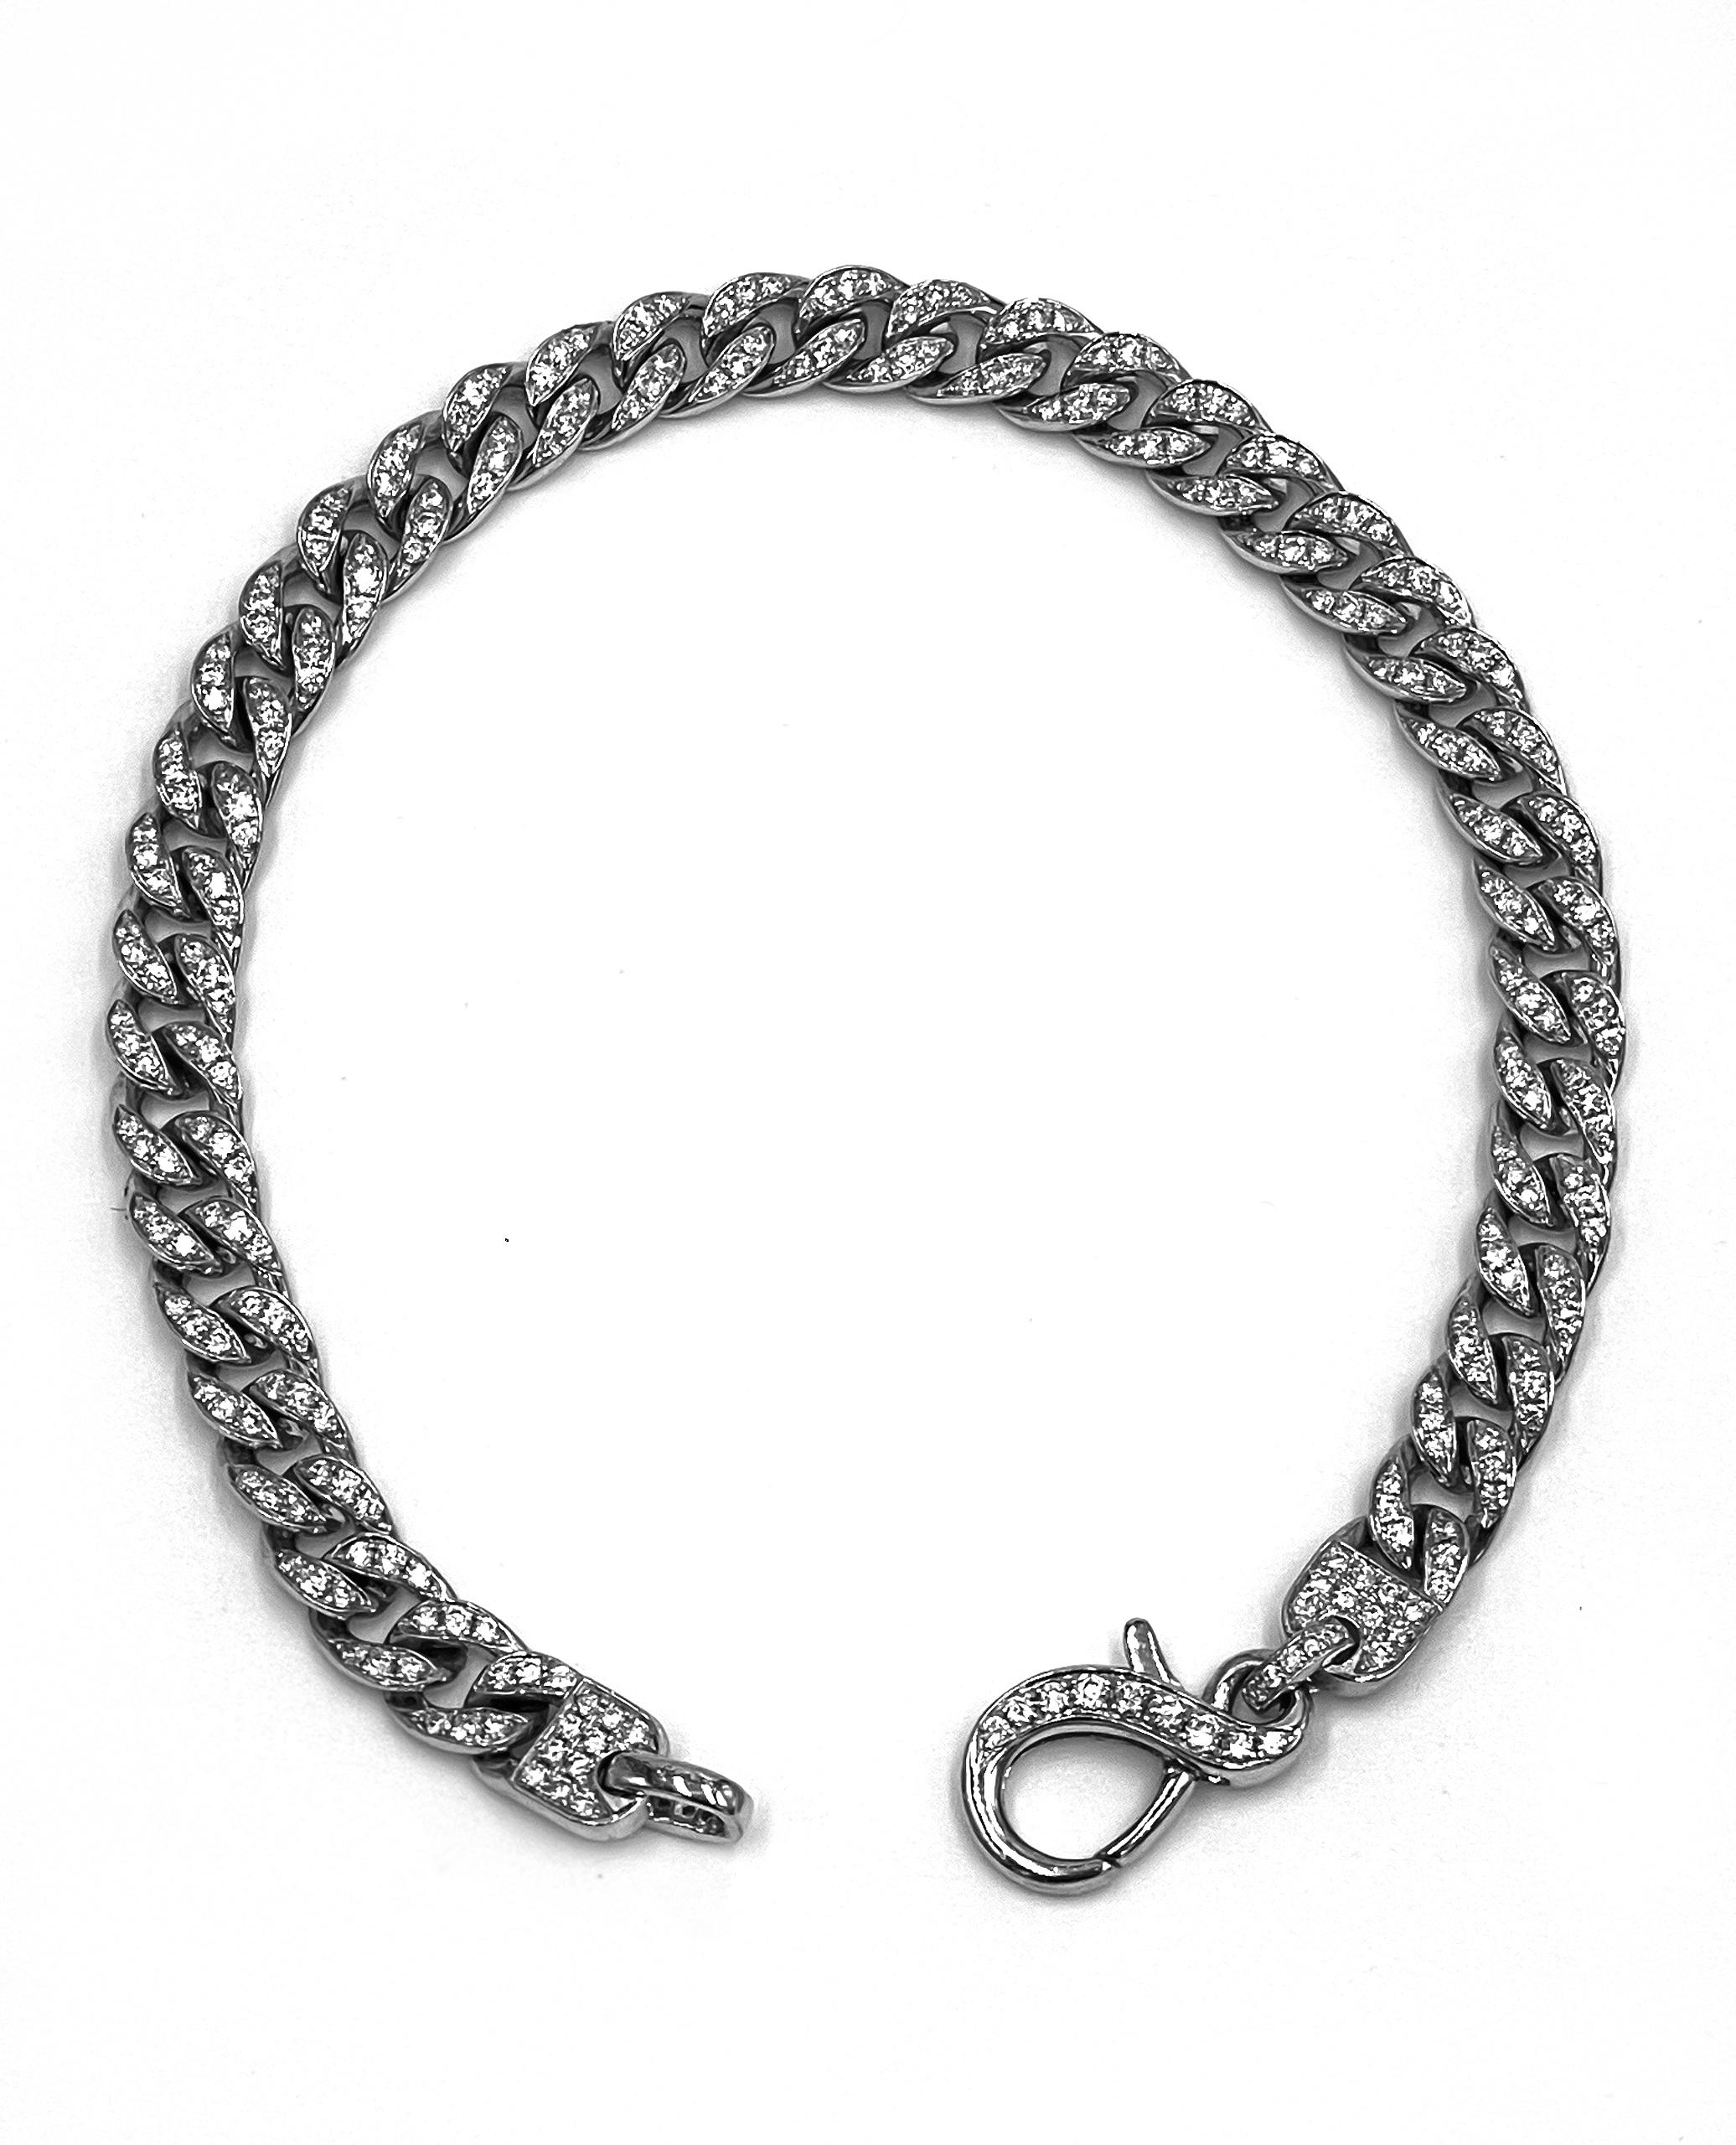 14K white gold diamond curb bracelet with diamond accented lobster clasp.  The bracelet is pave set with round brilliant-cut diamonds 1.58 carats total weight. 

- 7.25 inches long.
- Diamonds are G/H color, SI1/SI2 clarity.